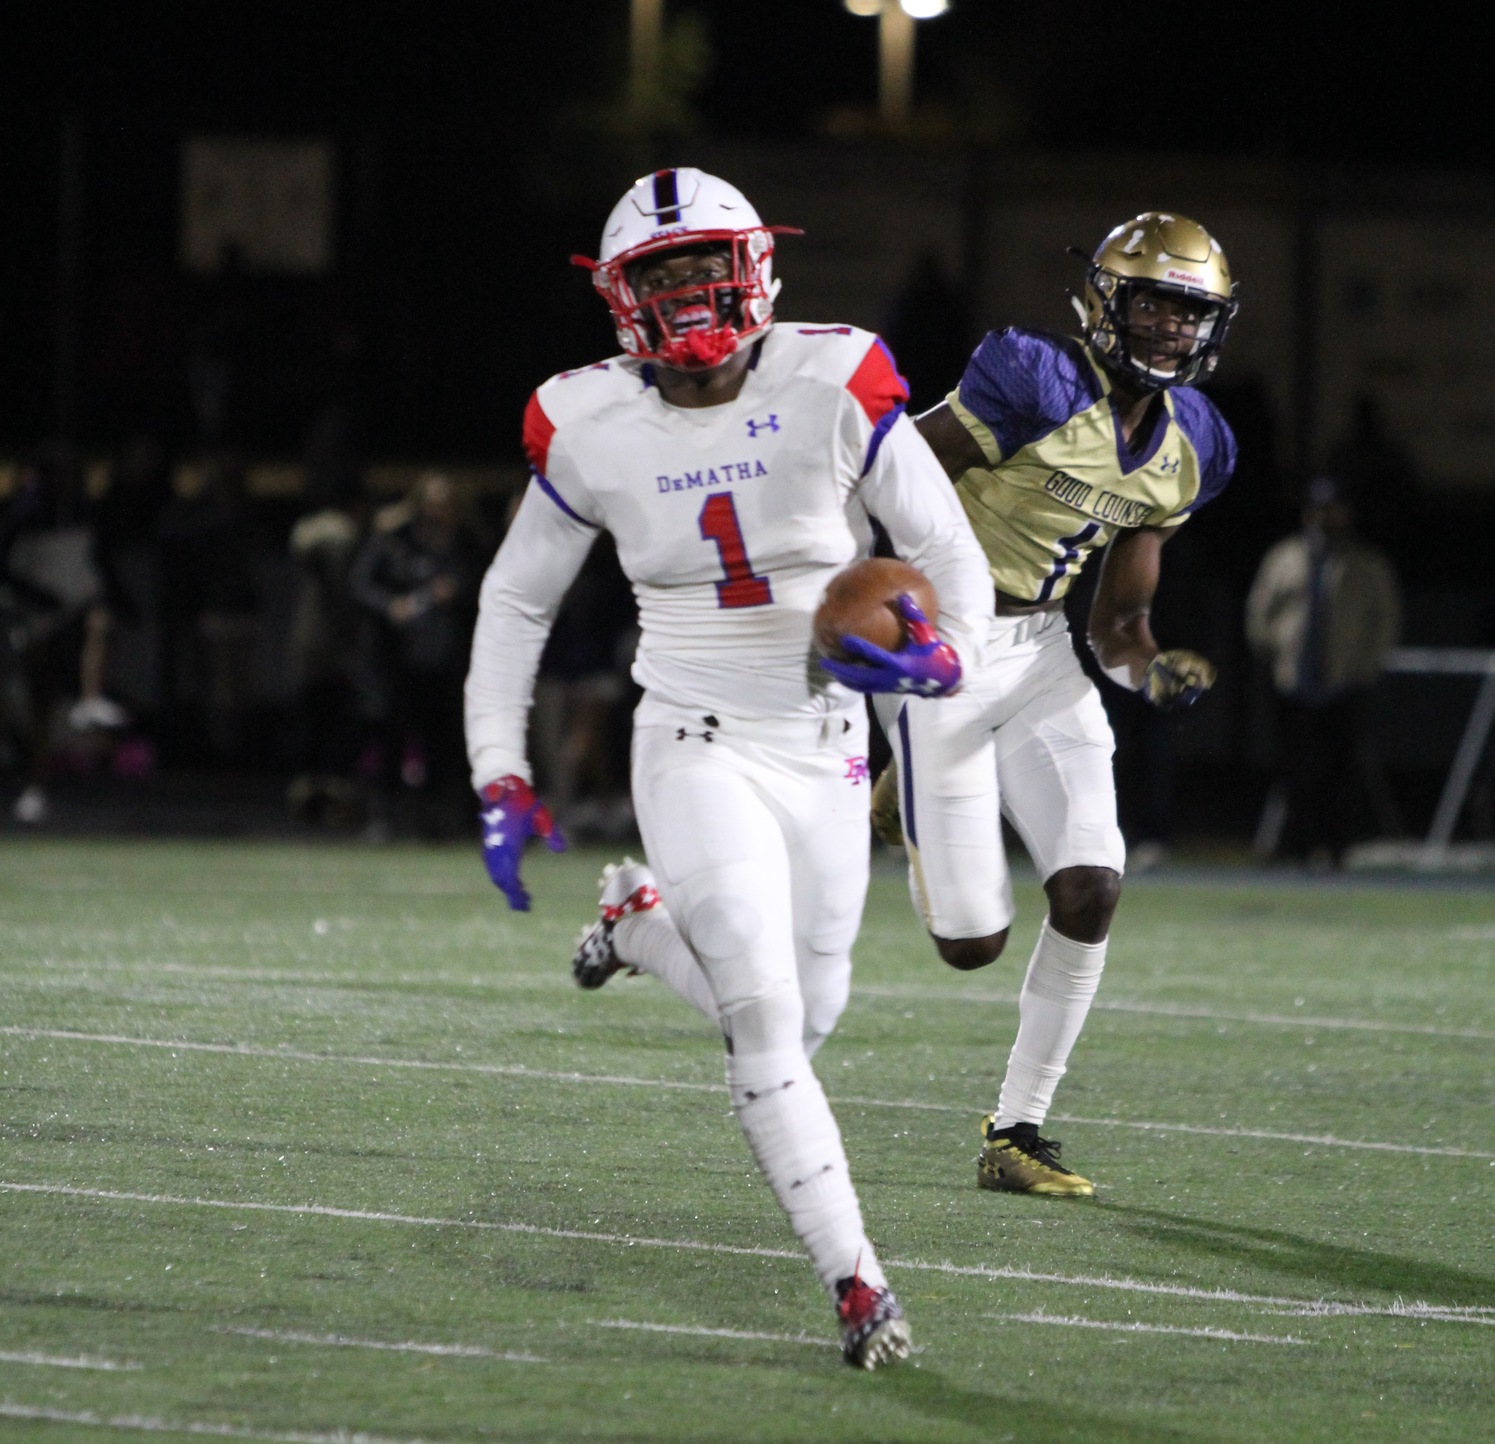 DeMatha Senior DeMarcco Hellams (shown) and Senior Nick Cross were all over the field in the Stags win.